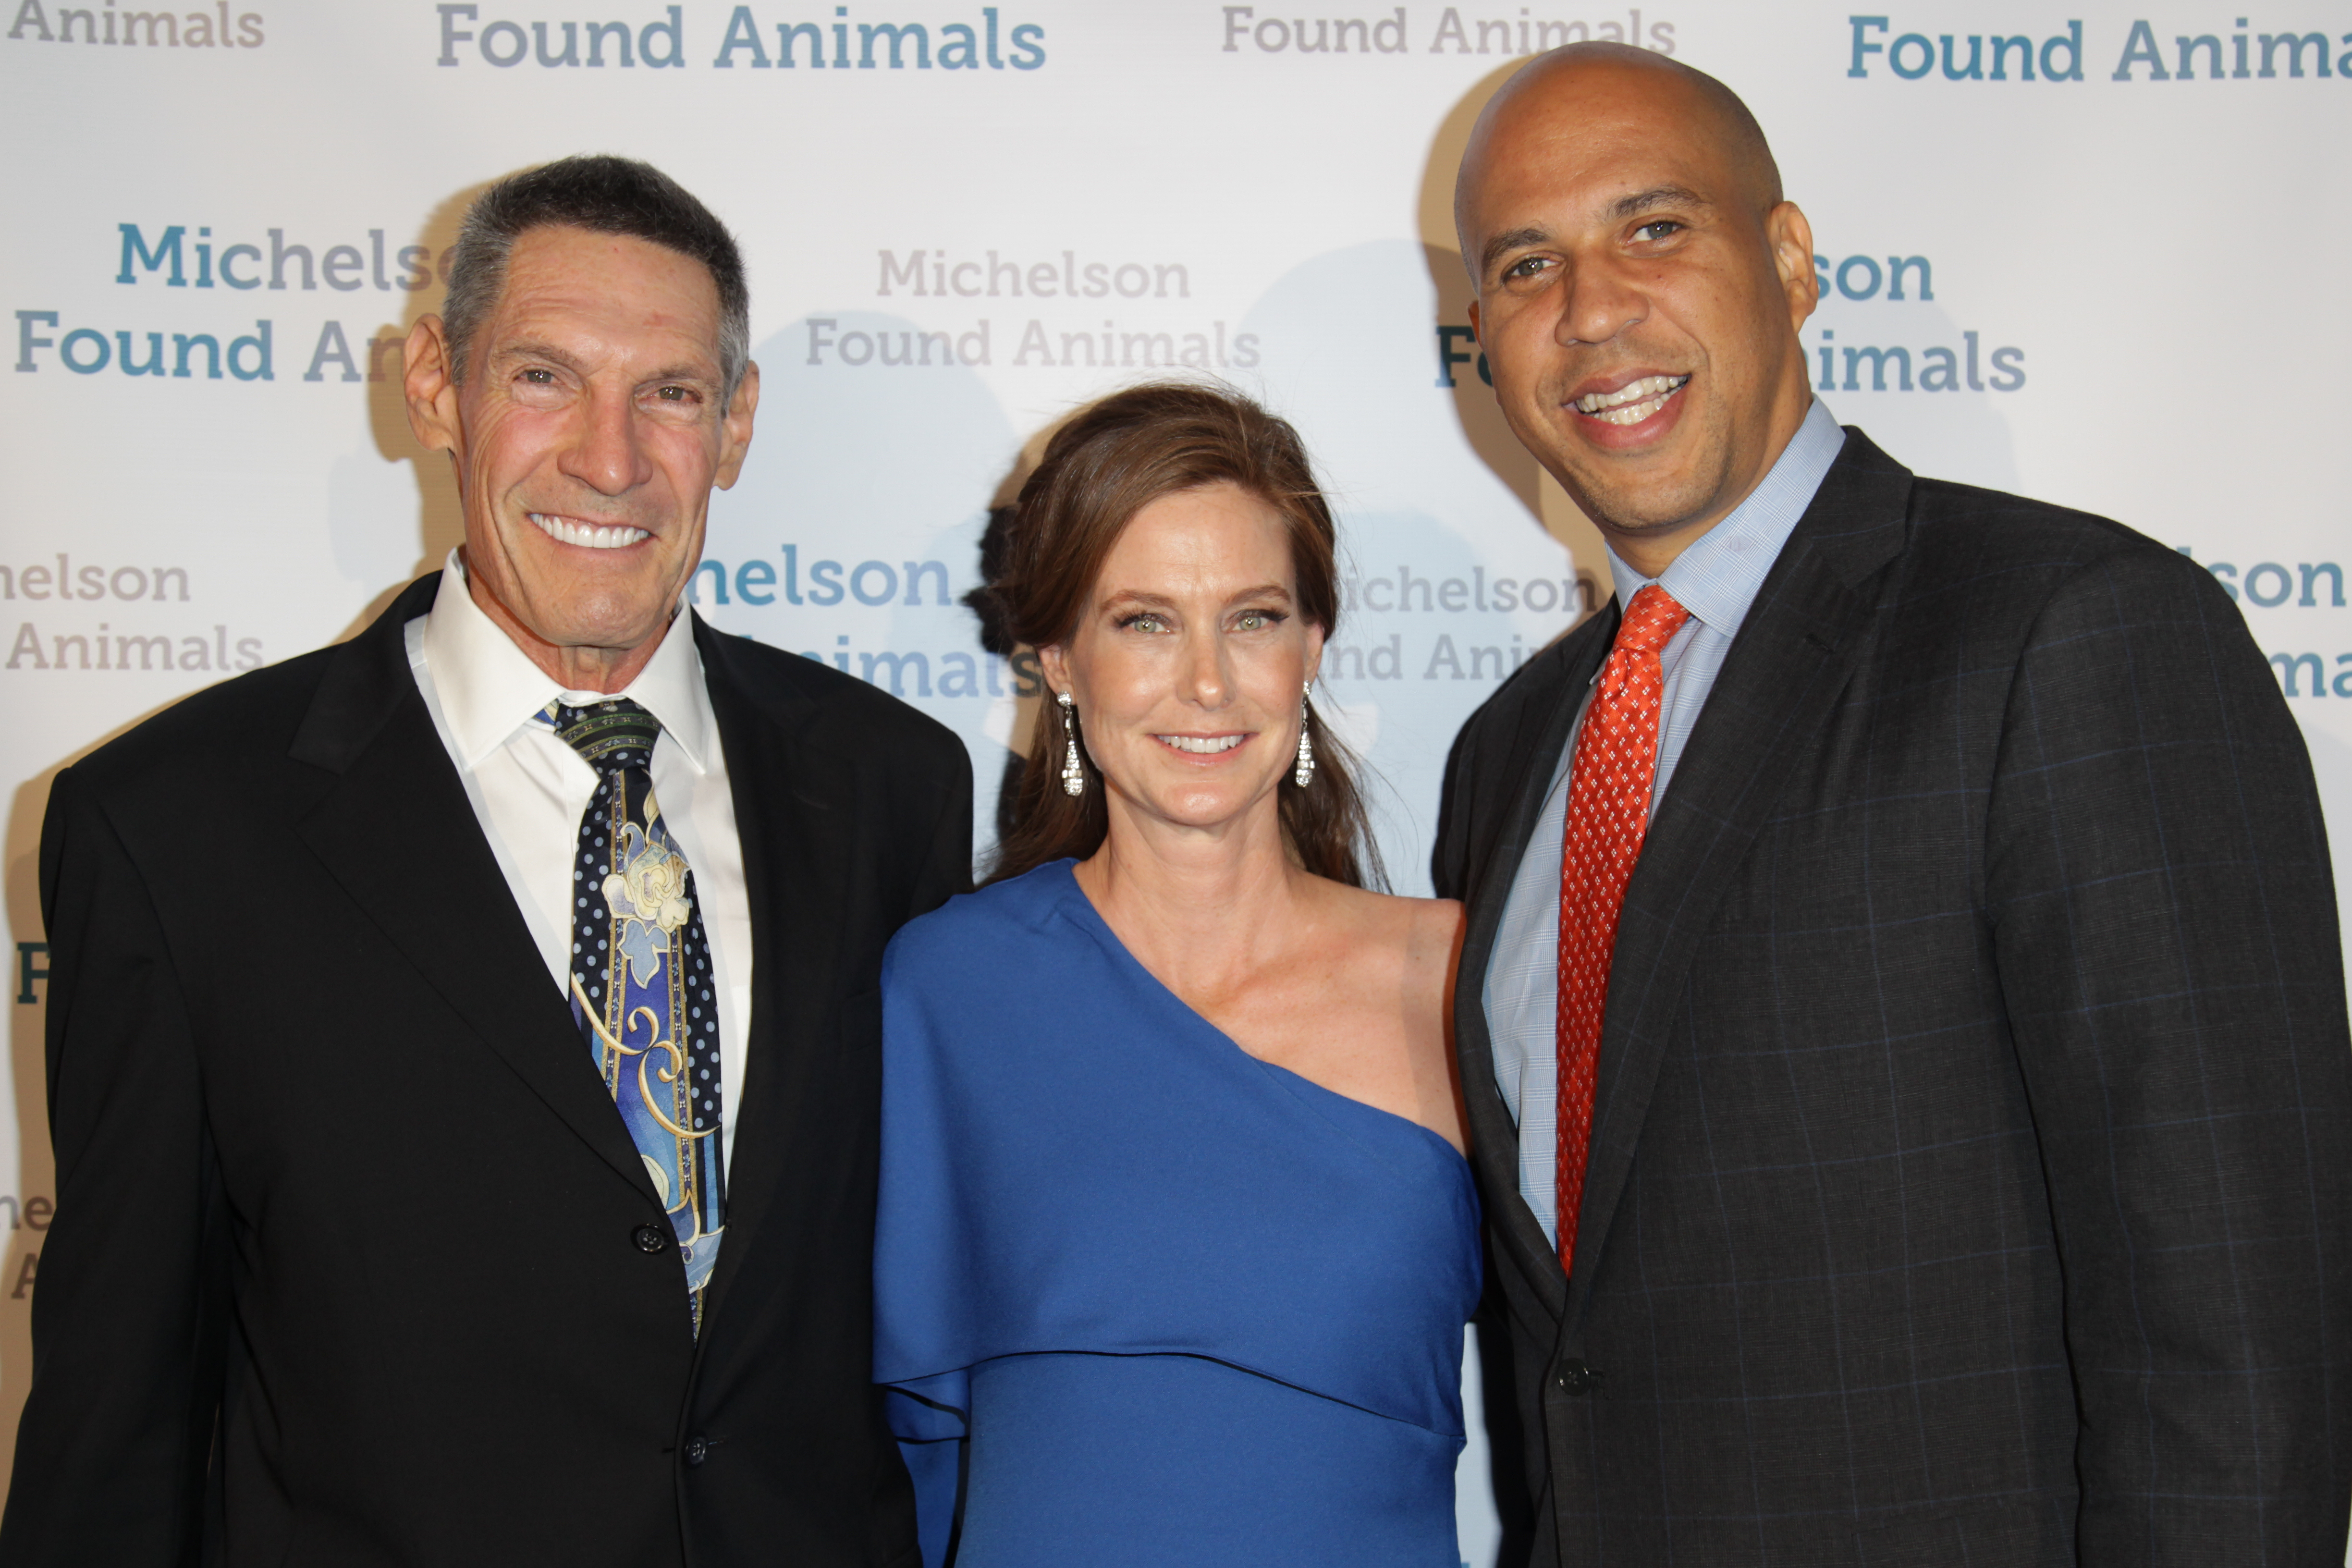 Michelson Found Animals Hosts 5th Annual Gala Honoring Leaders in Animal  Welfare | Business Wire